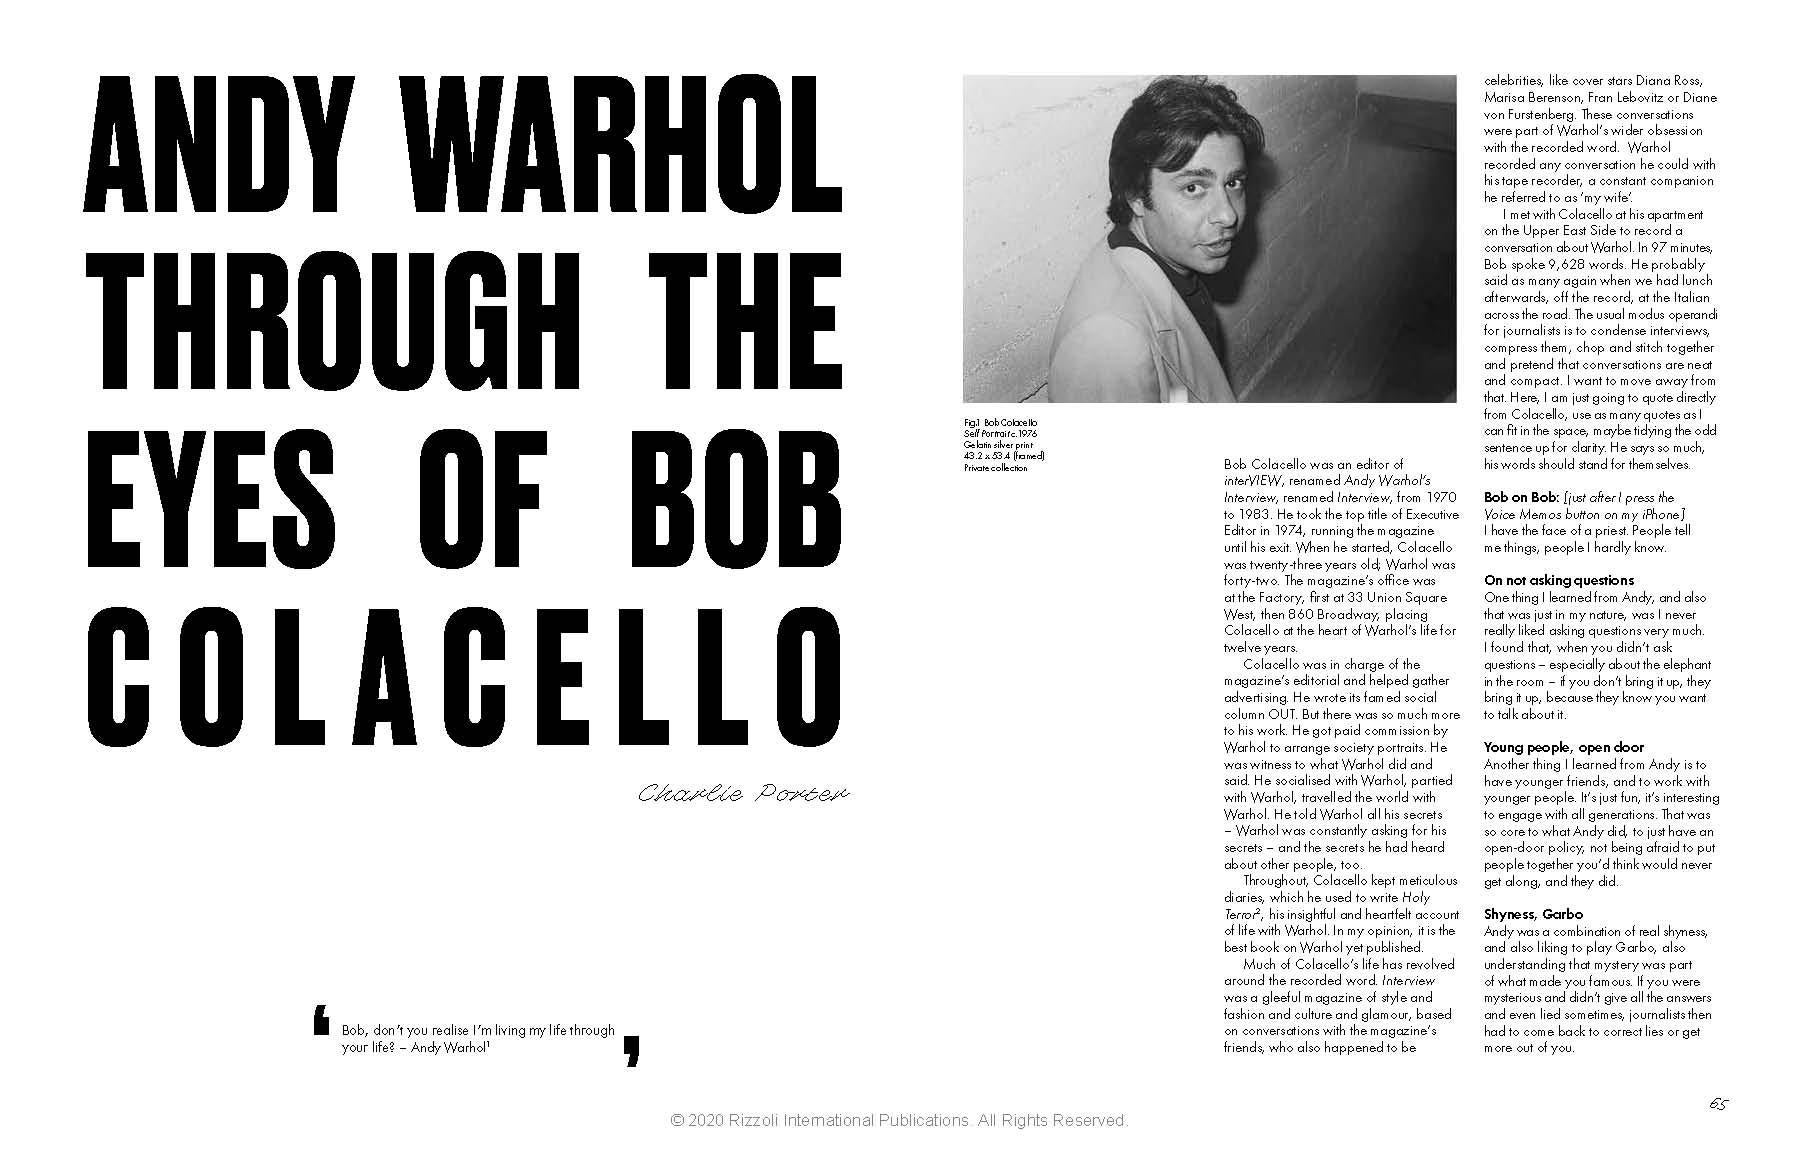 Author Gregor Muir and Yilmaz Dziewior, Contributions by Kenneth Brummel and Stephan Diederich and Olivia Laing
A new reading of Warhol presents his life and work in the context of contemporary concerns, emphasizing his continued relevance in the